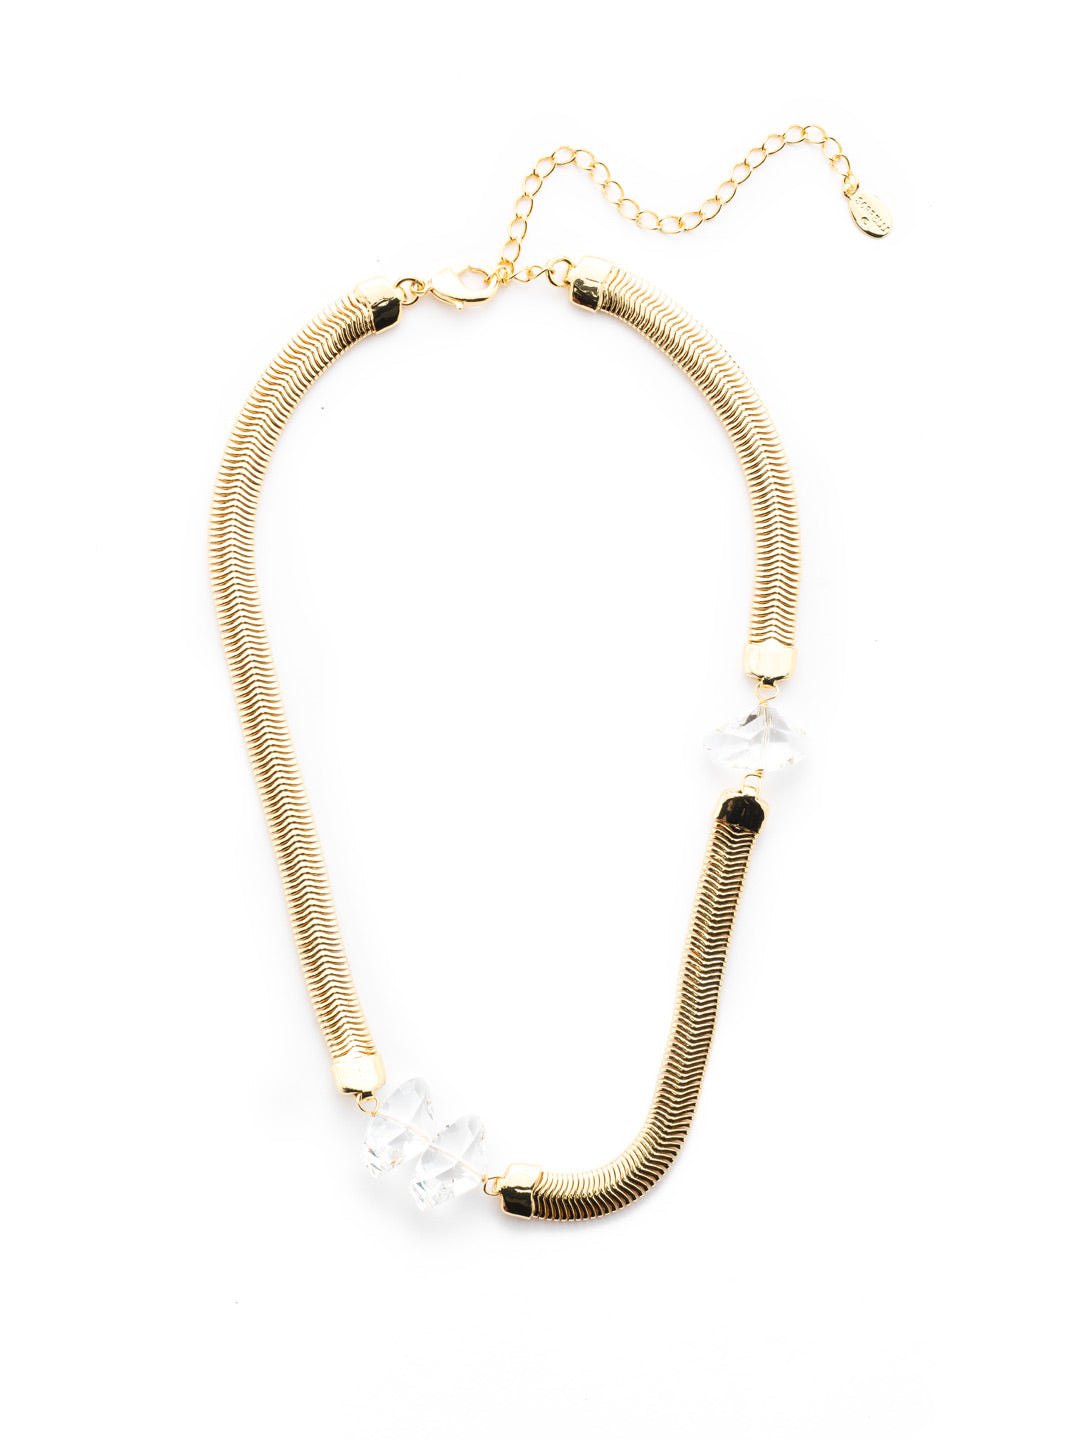 Parker Tennis Necklace - 4NEU52BGCRY - <p>The Parker Tennis Necklace is edgy and sophisticated all at once. Snakechain gets some significant sparkle from not one or two, but three standout sparkling crystals. From Sorrelli's Crystal collection in our Bright Gold-tone finish.</p>